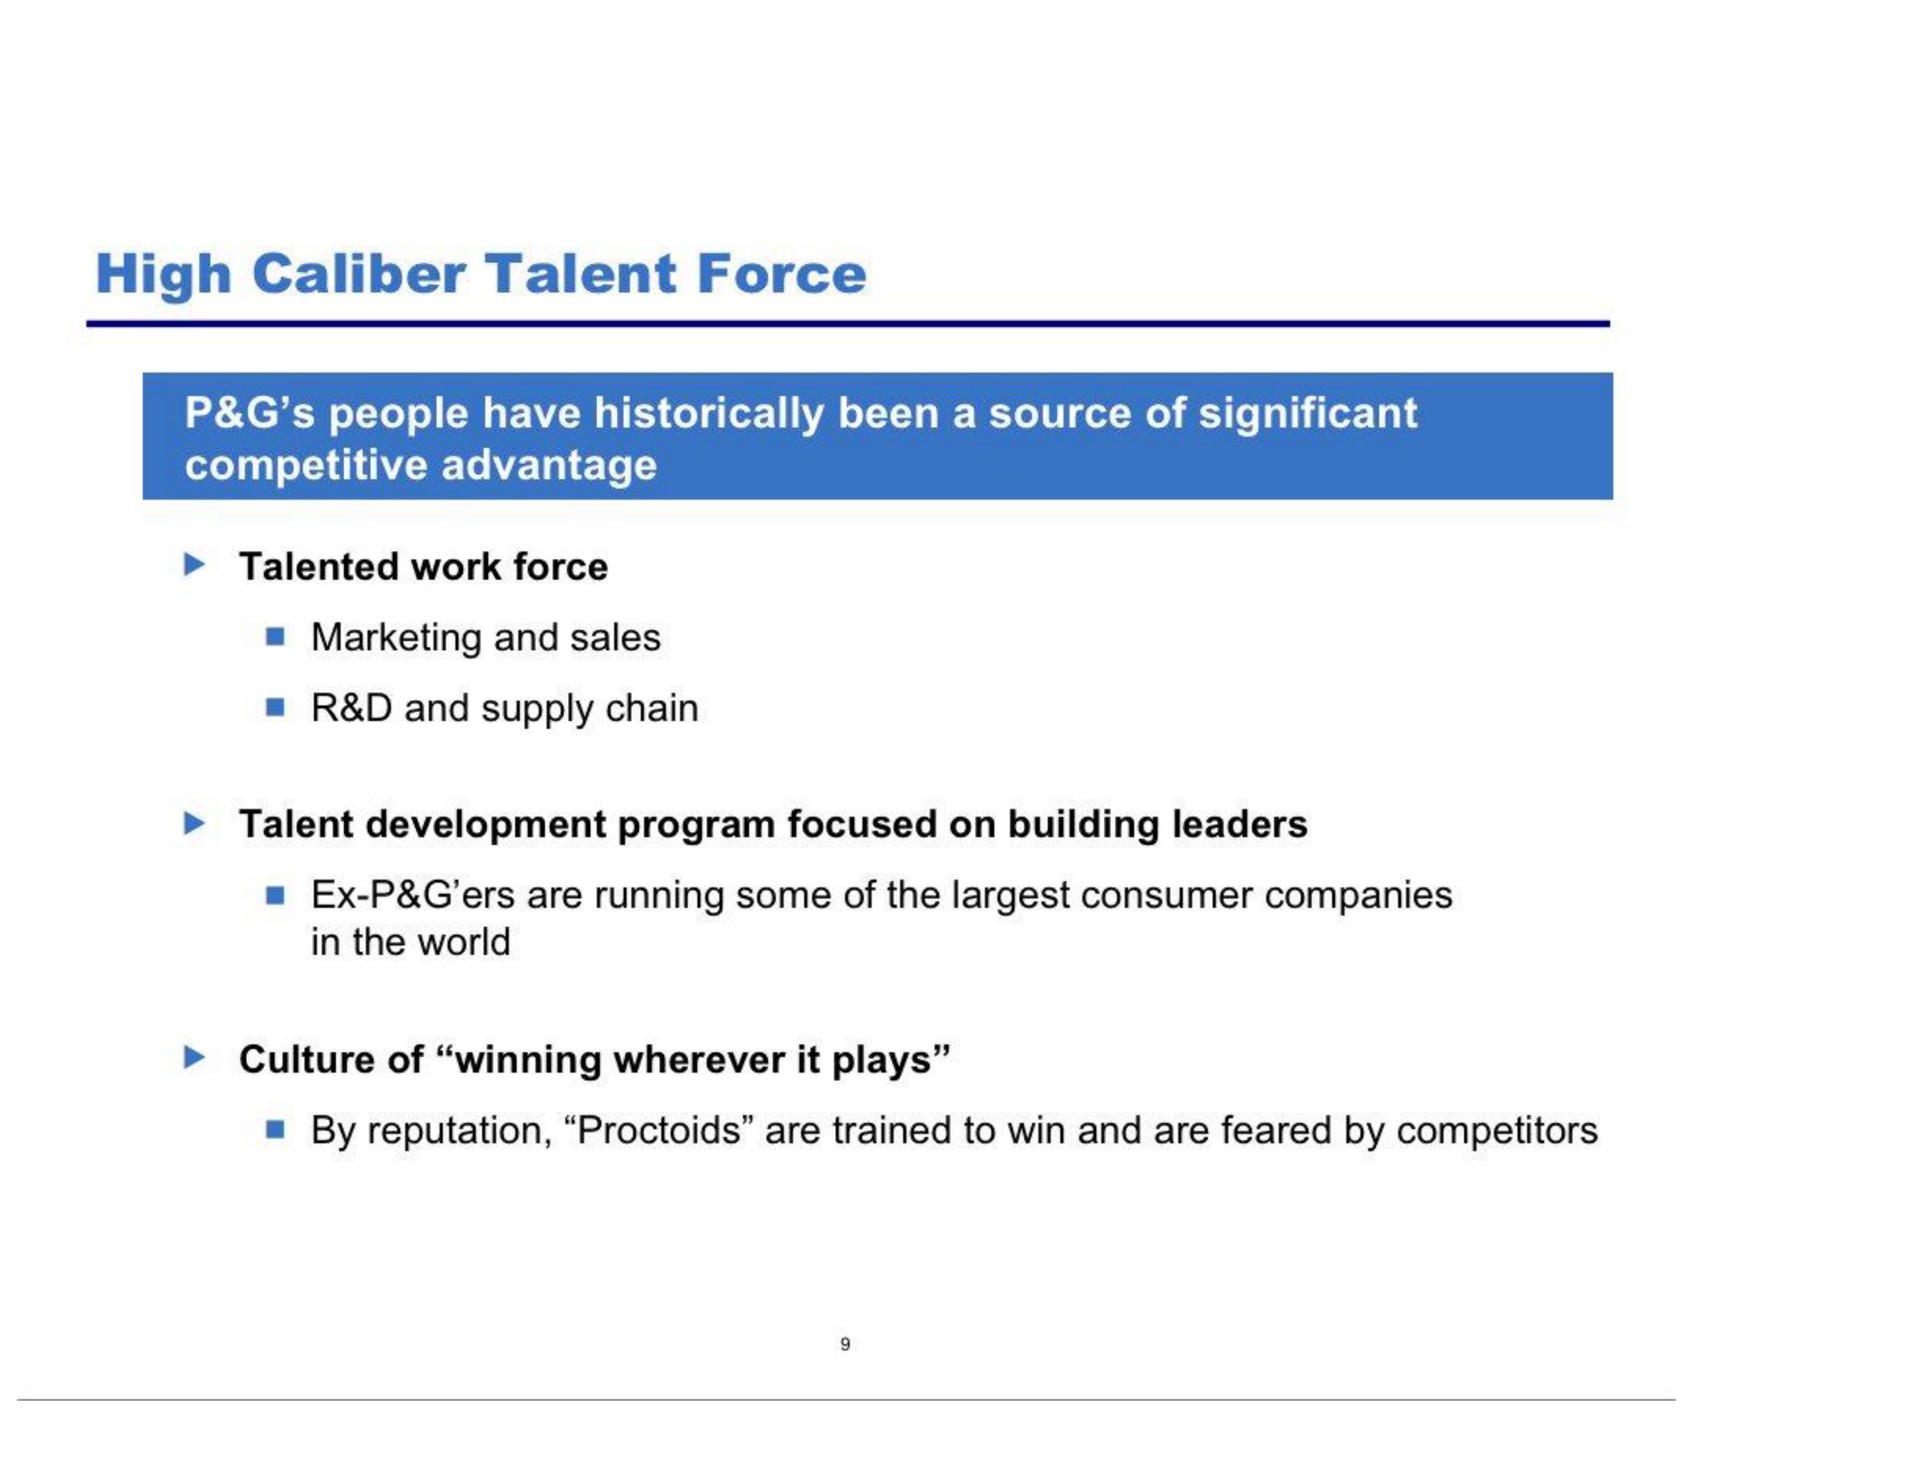 high caliber talent force | Pershing Square